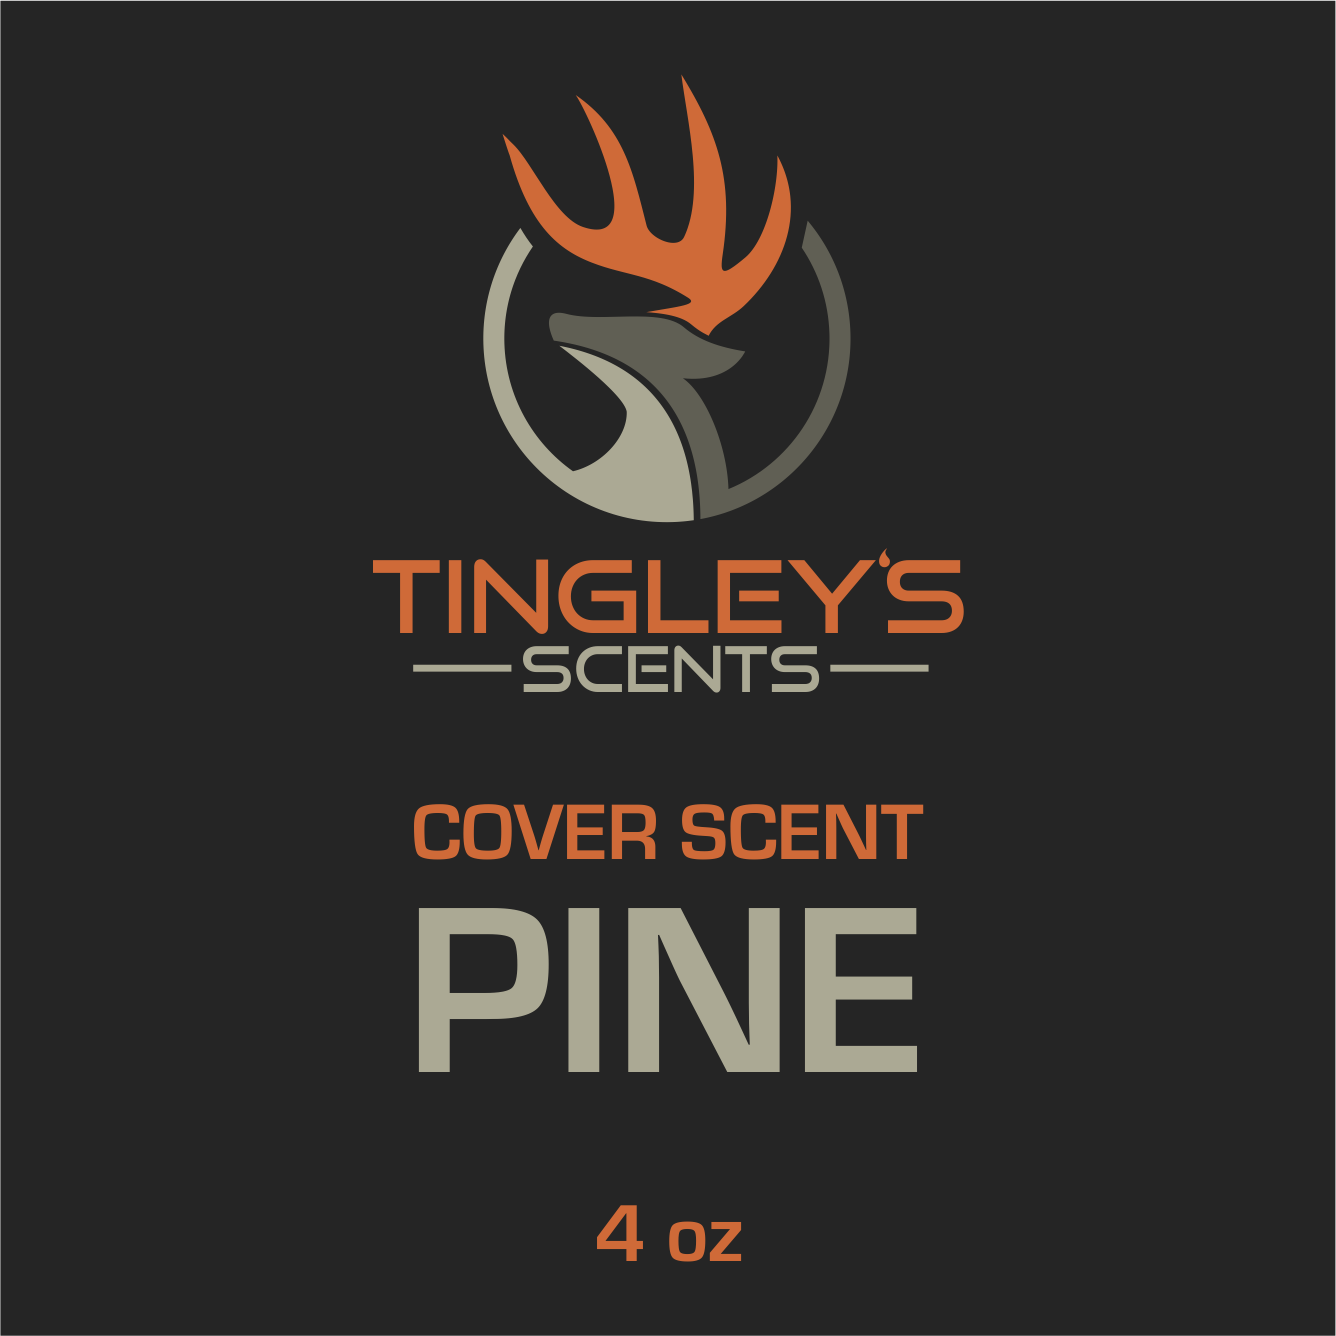 PINE Cover Scent